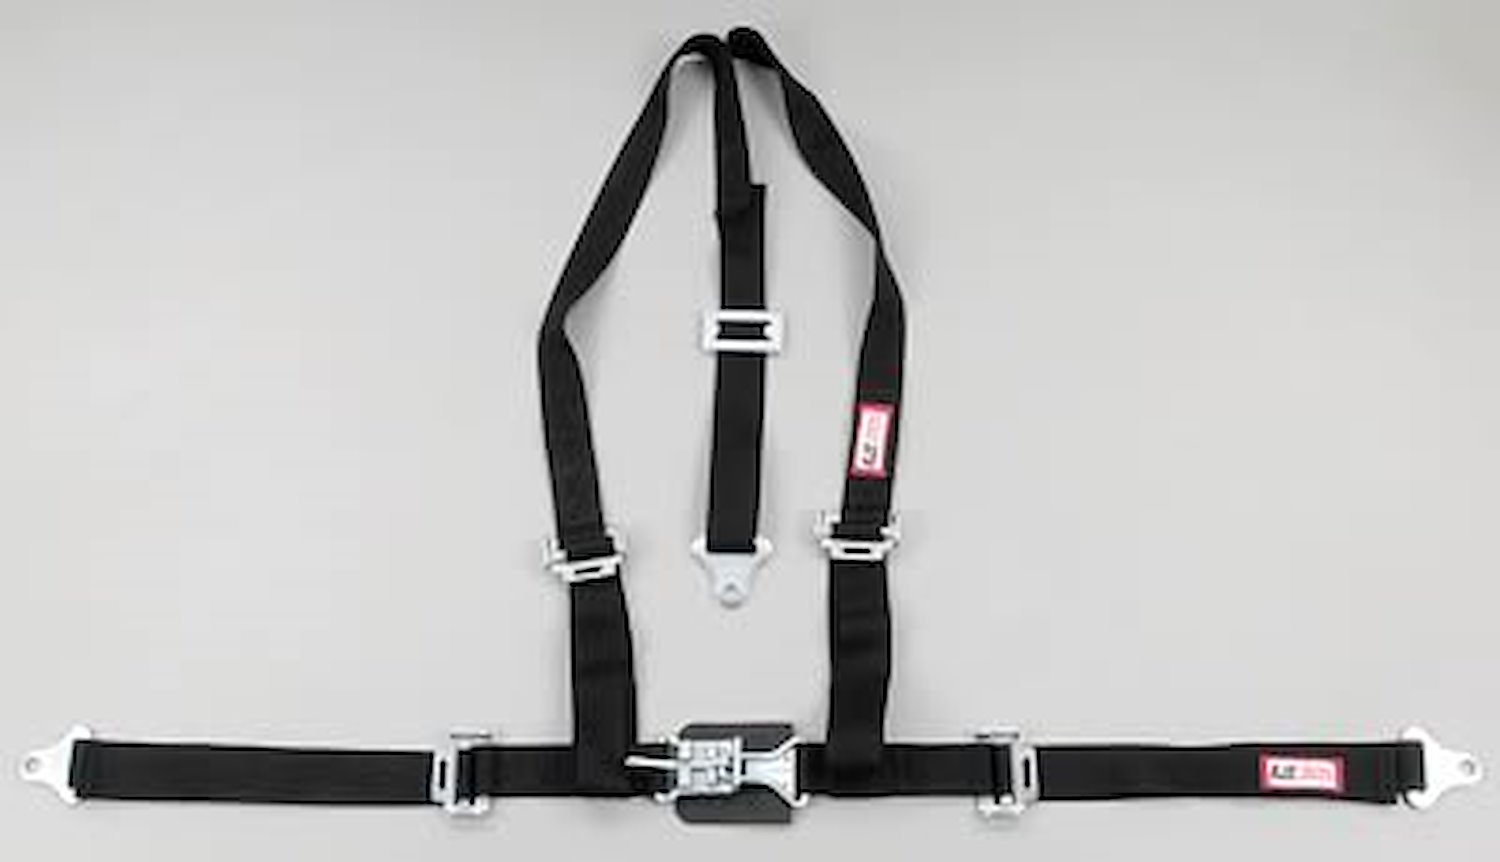 NON-SFI L&L HARNESS 2 PULL DOWN Lap Belt SEWN IN 2 S.H. Y FLOOR Mount w/STERNUM STRAP ALL WRAP ENDS PURPLE